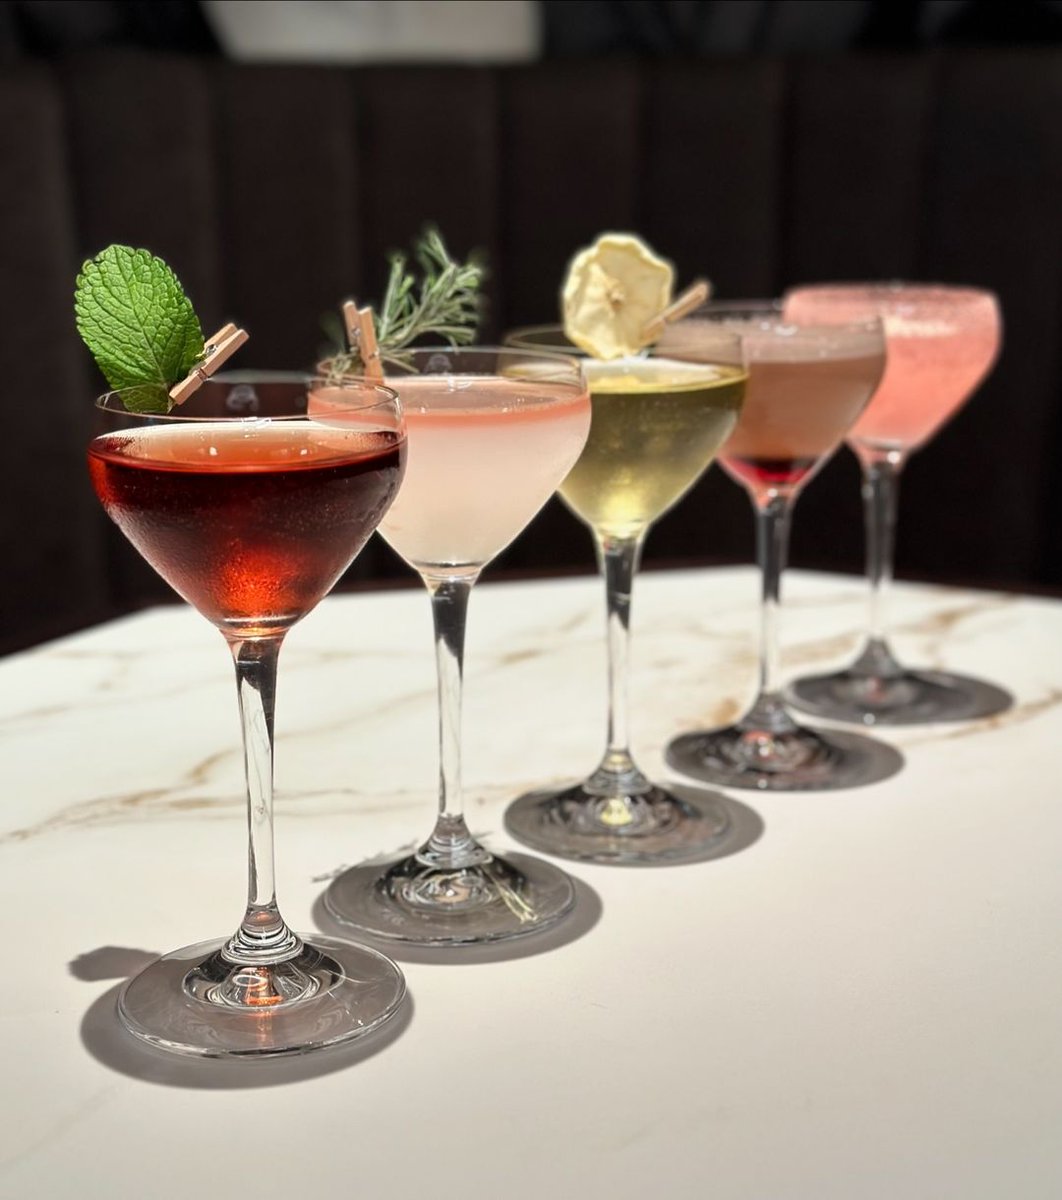 As part of our new package, A Fragrant Escape, our bar team at Montagu’s Mews have created a range of exquisite cocktails inspired by each fragrance included in @PenhaligonsLtd special discovery set Find out more about this package by visiting royalcrescent.co.uk #bathuk